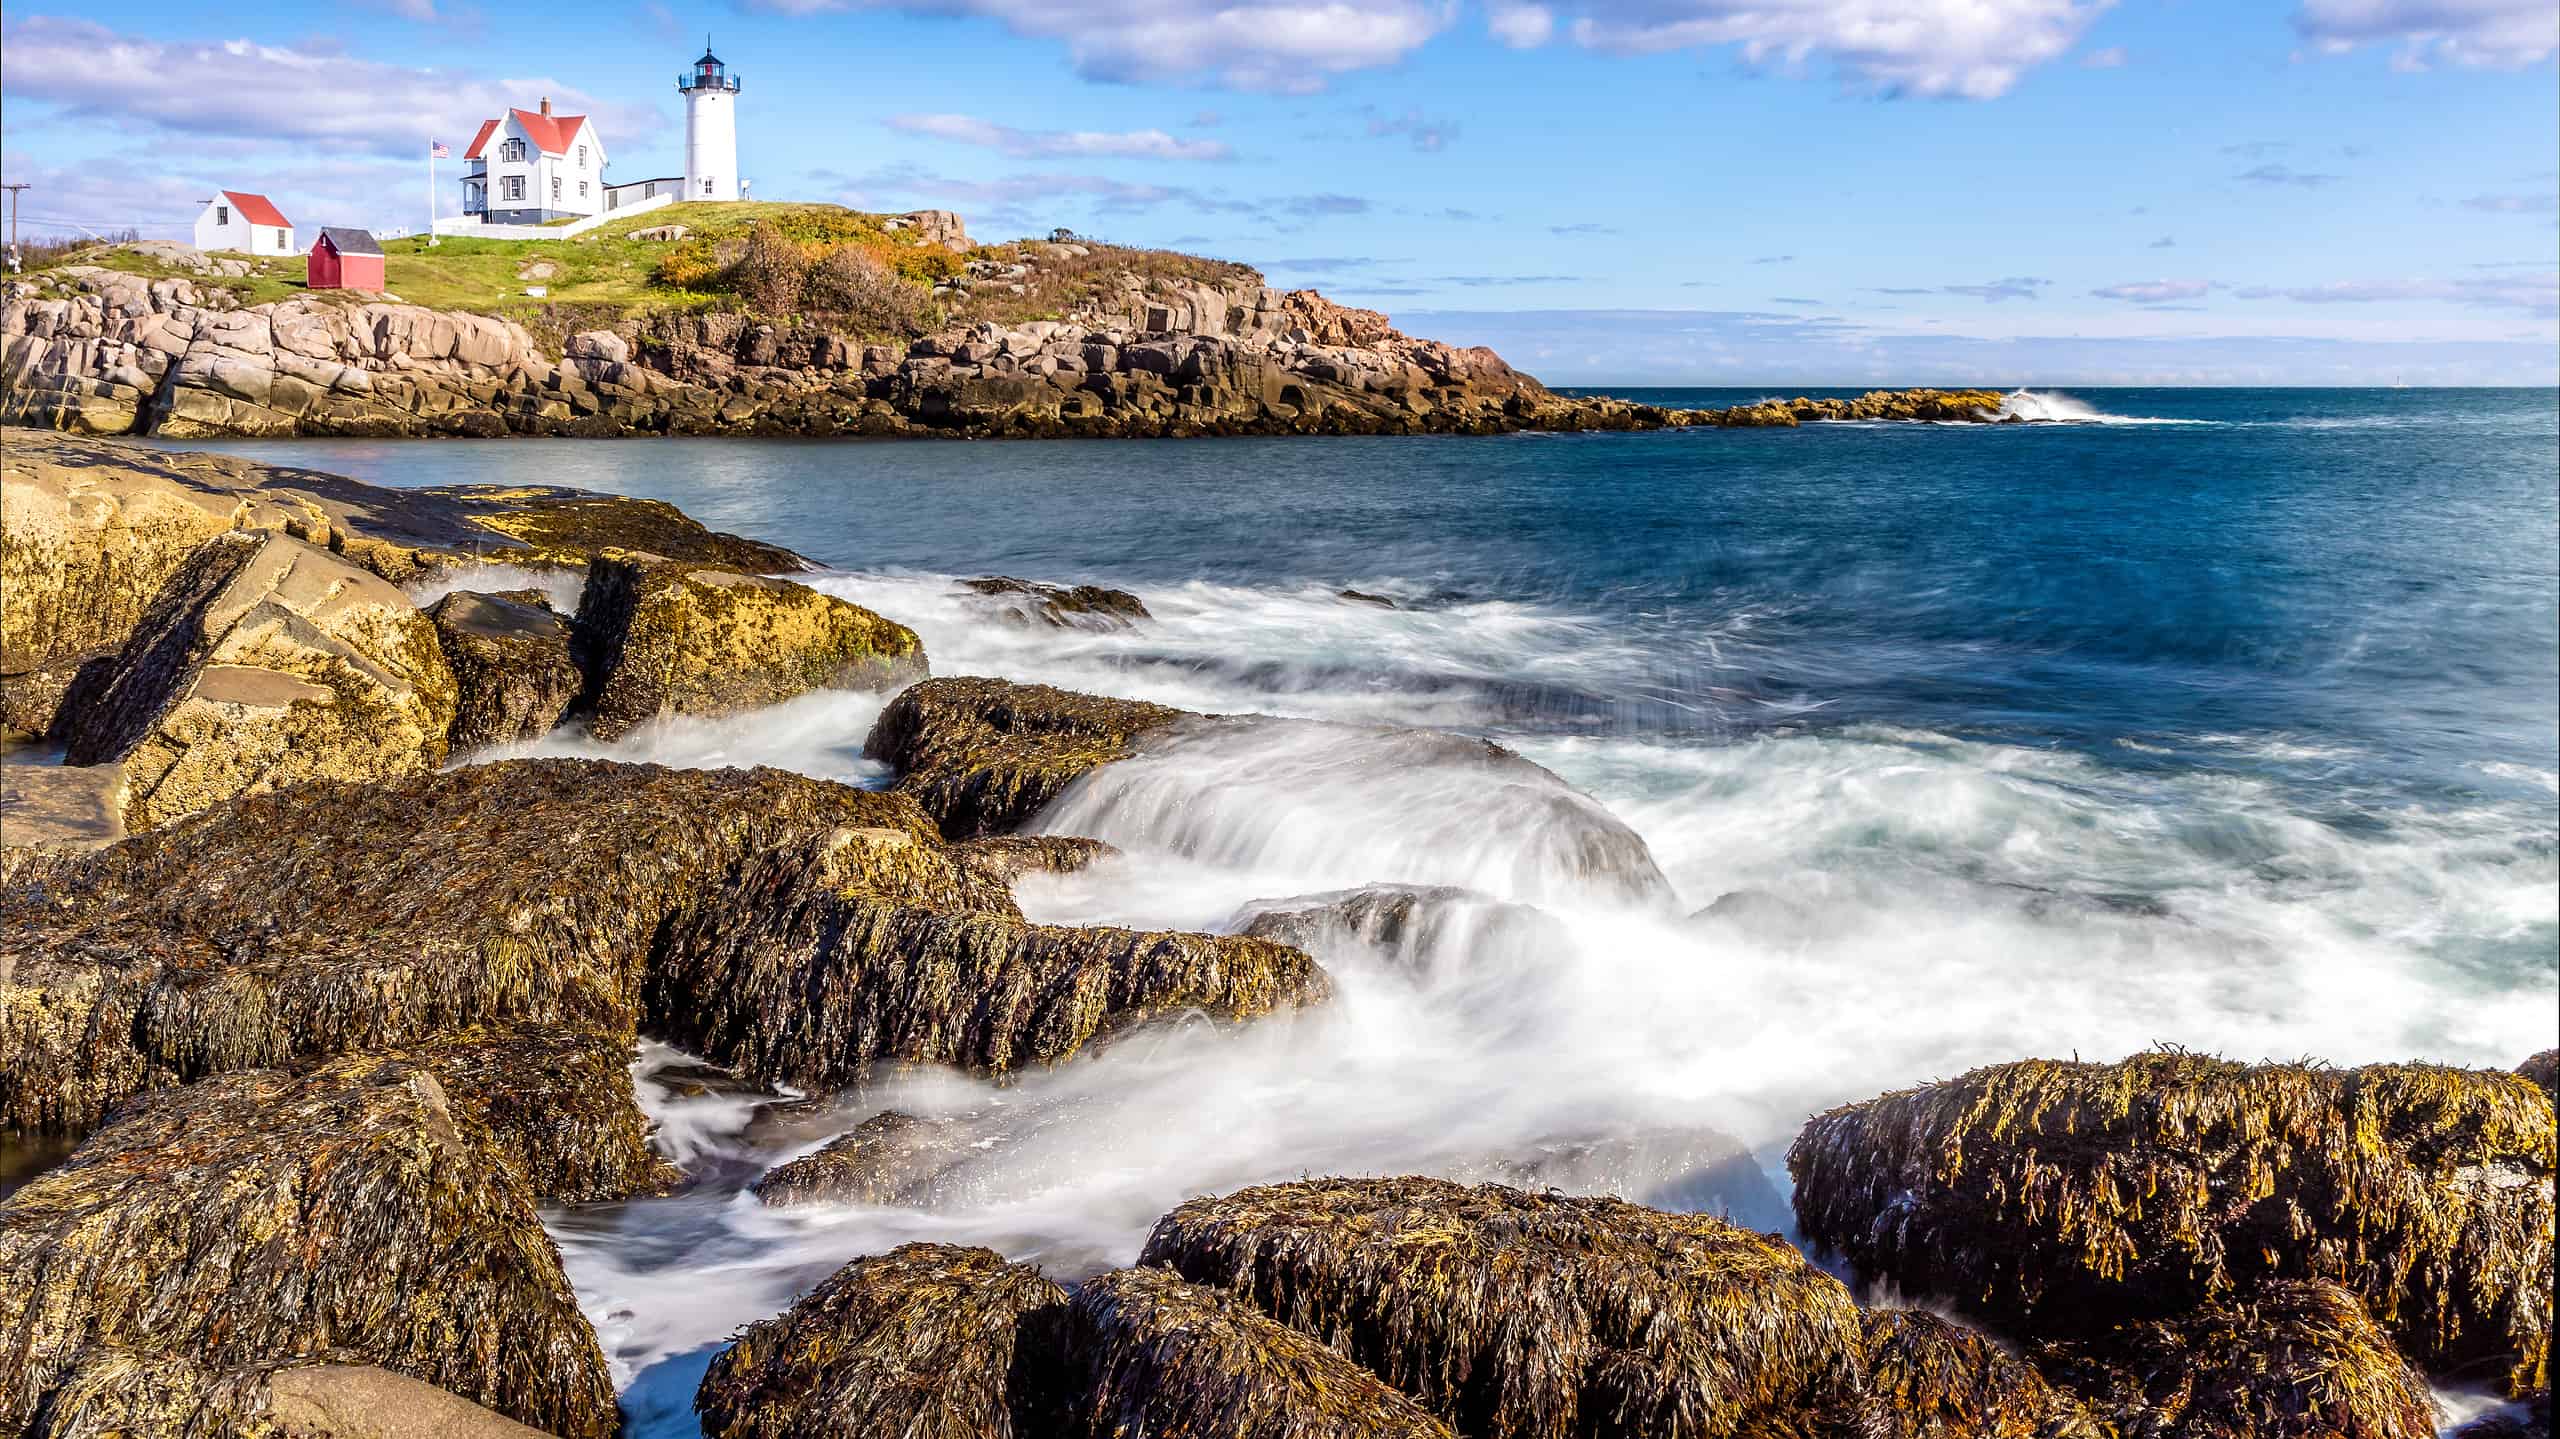 View of one of the best beaches in Maine with Cape Neddick lighthouse in the background